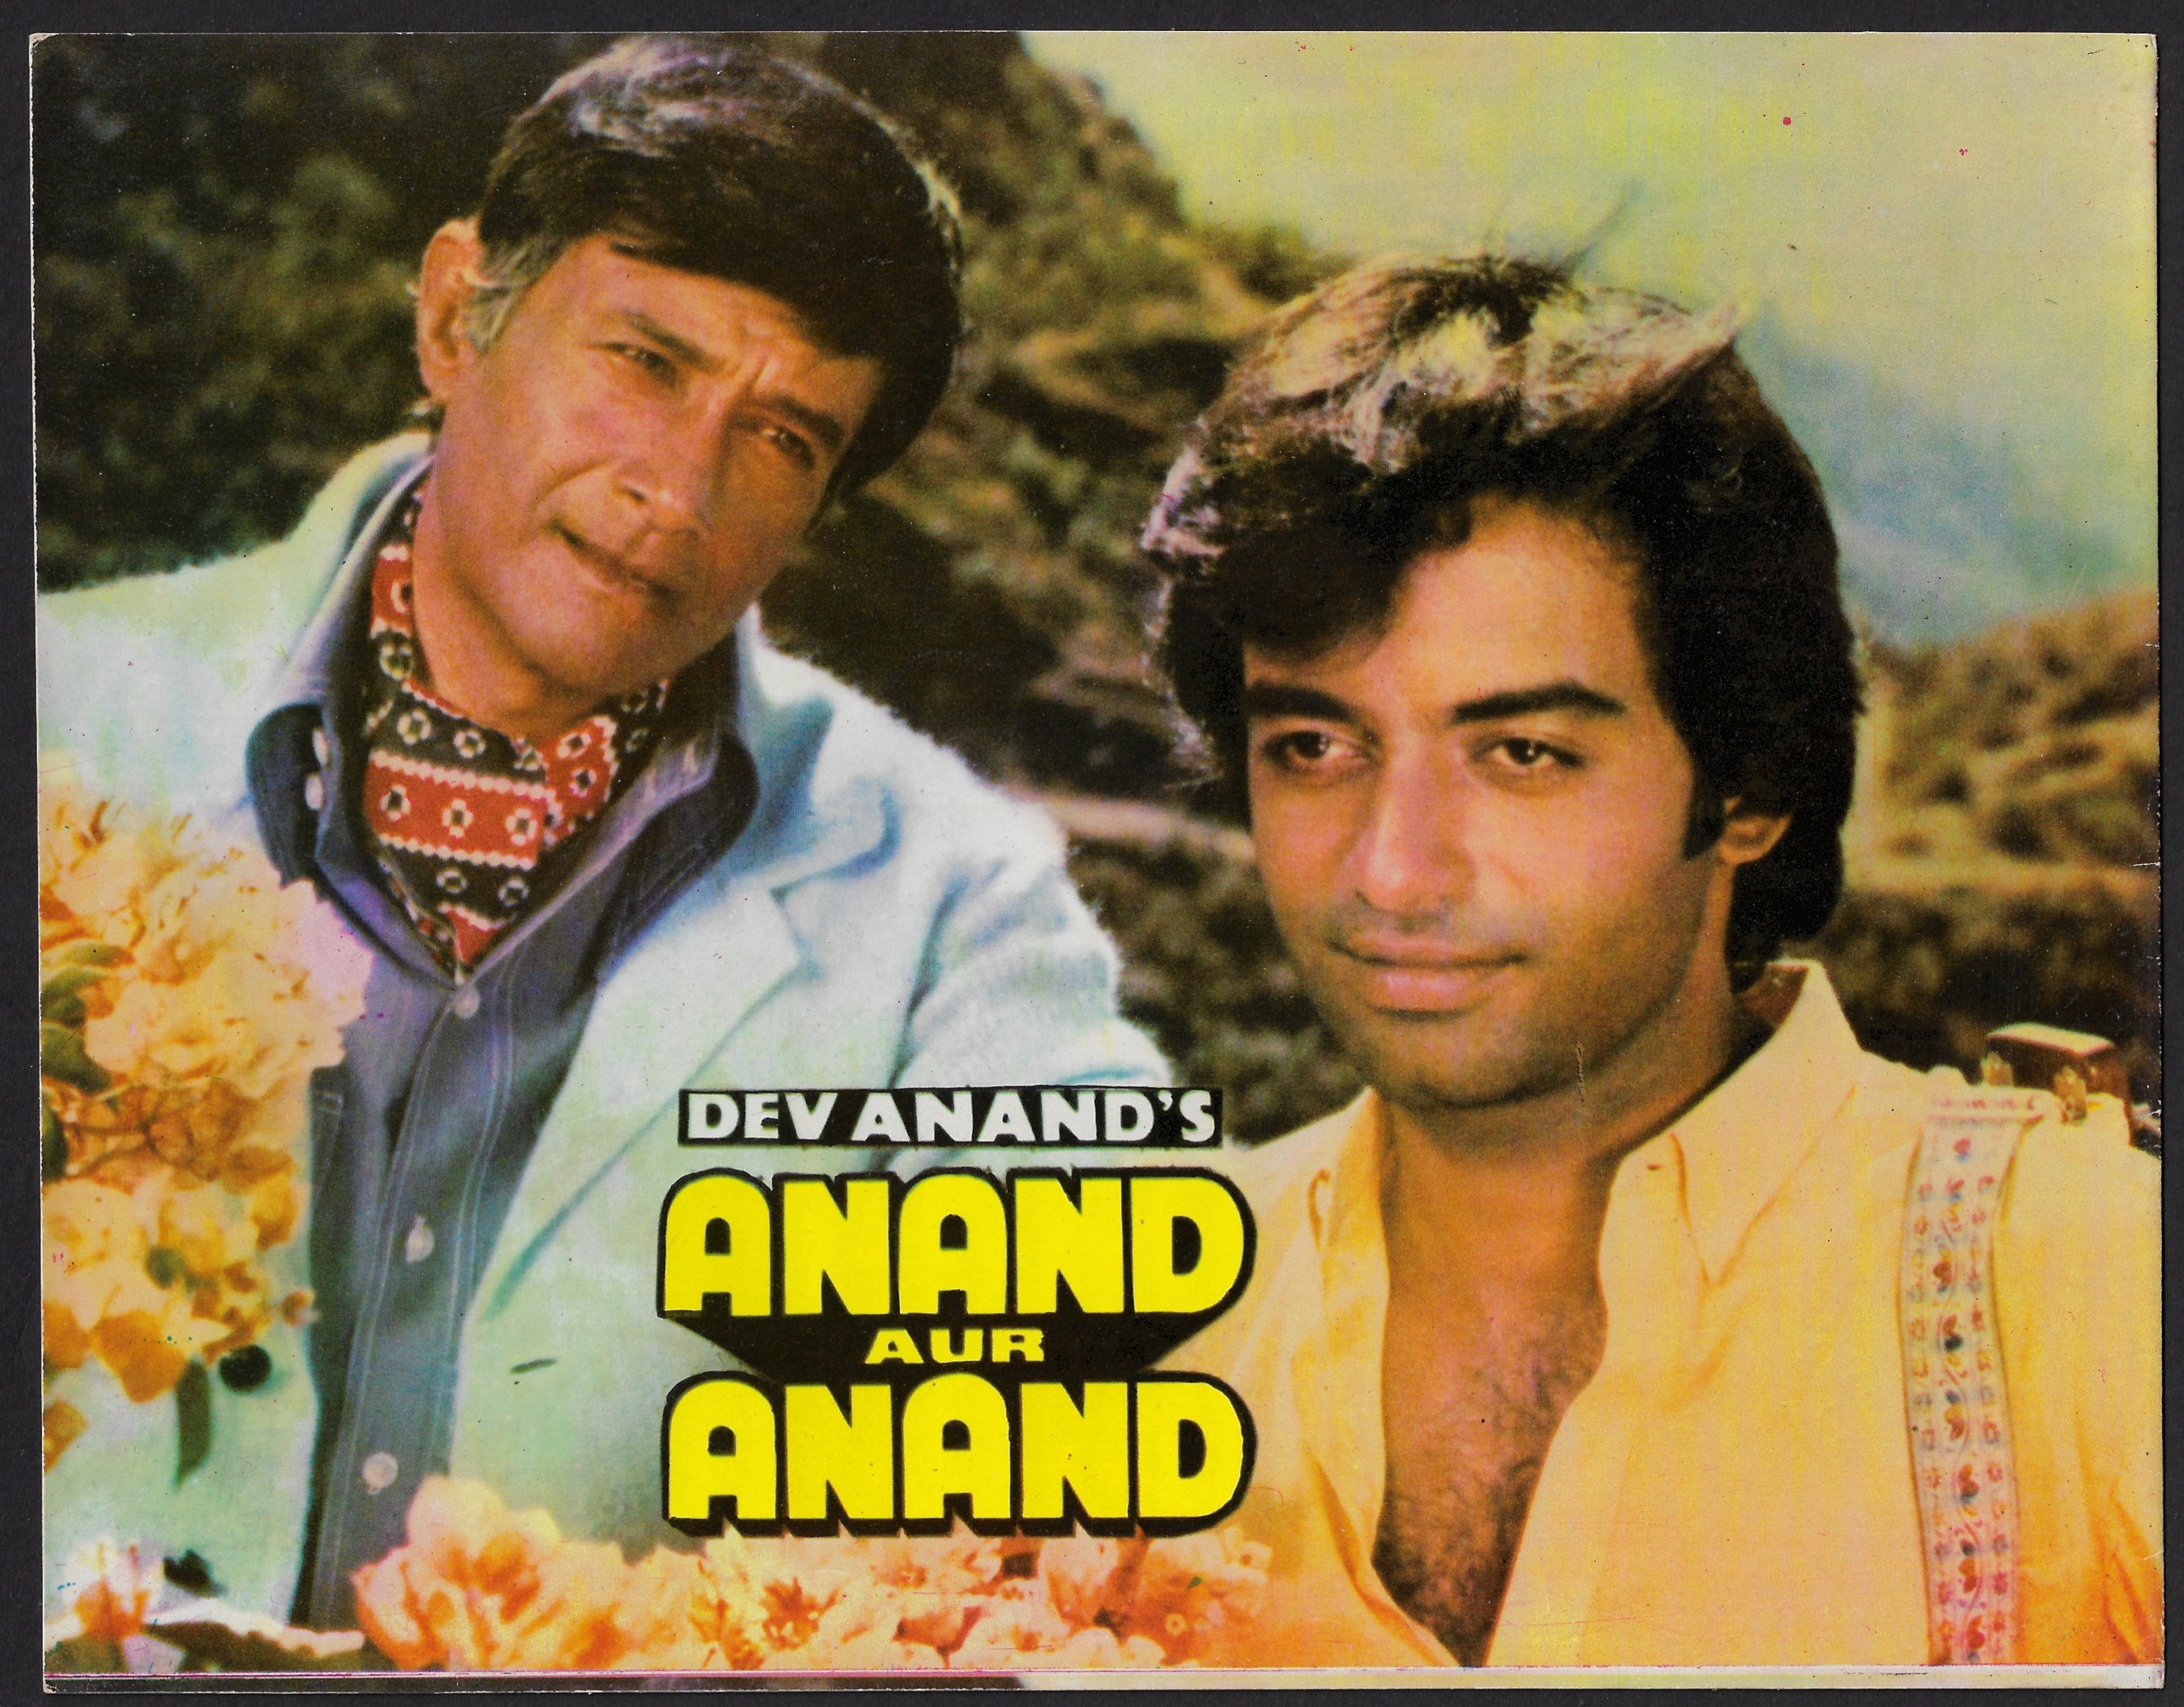 Anand Aur Anand - Wikipedia